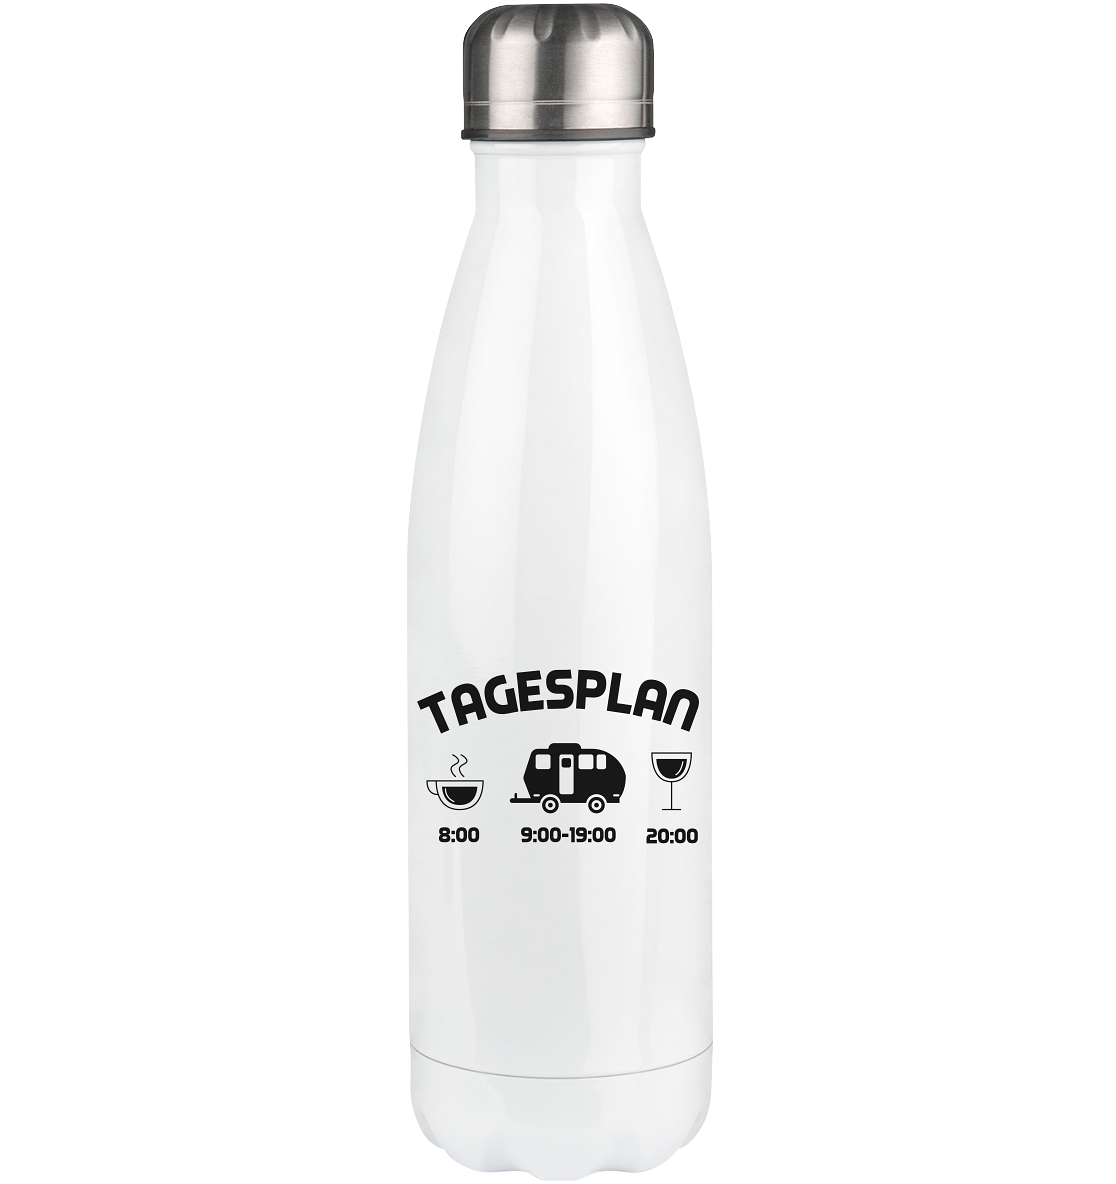 Tagesplan 2 - Edelstahl Thermosflasche camping 500ml